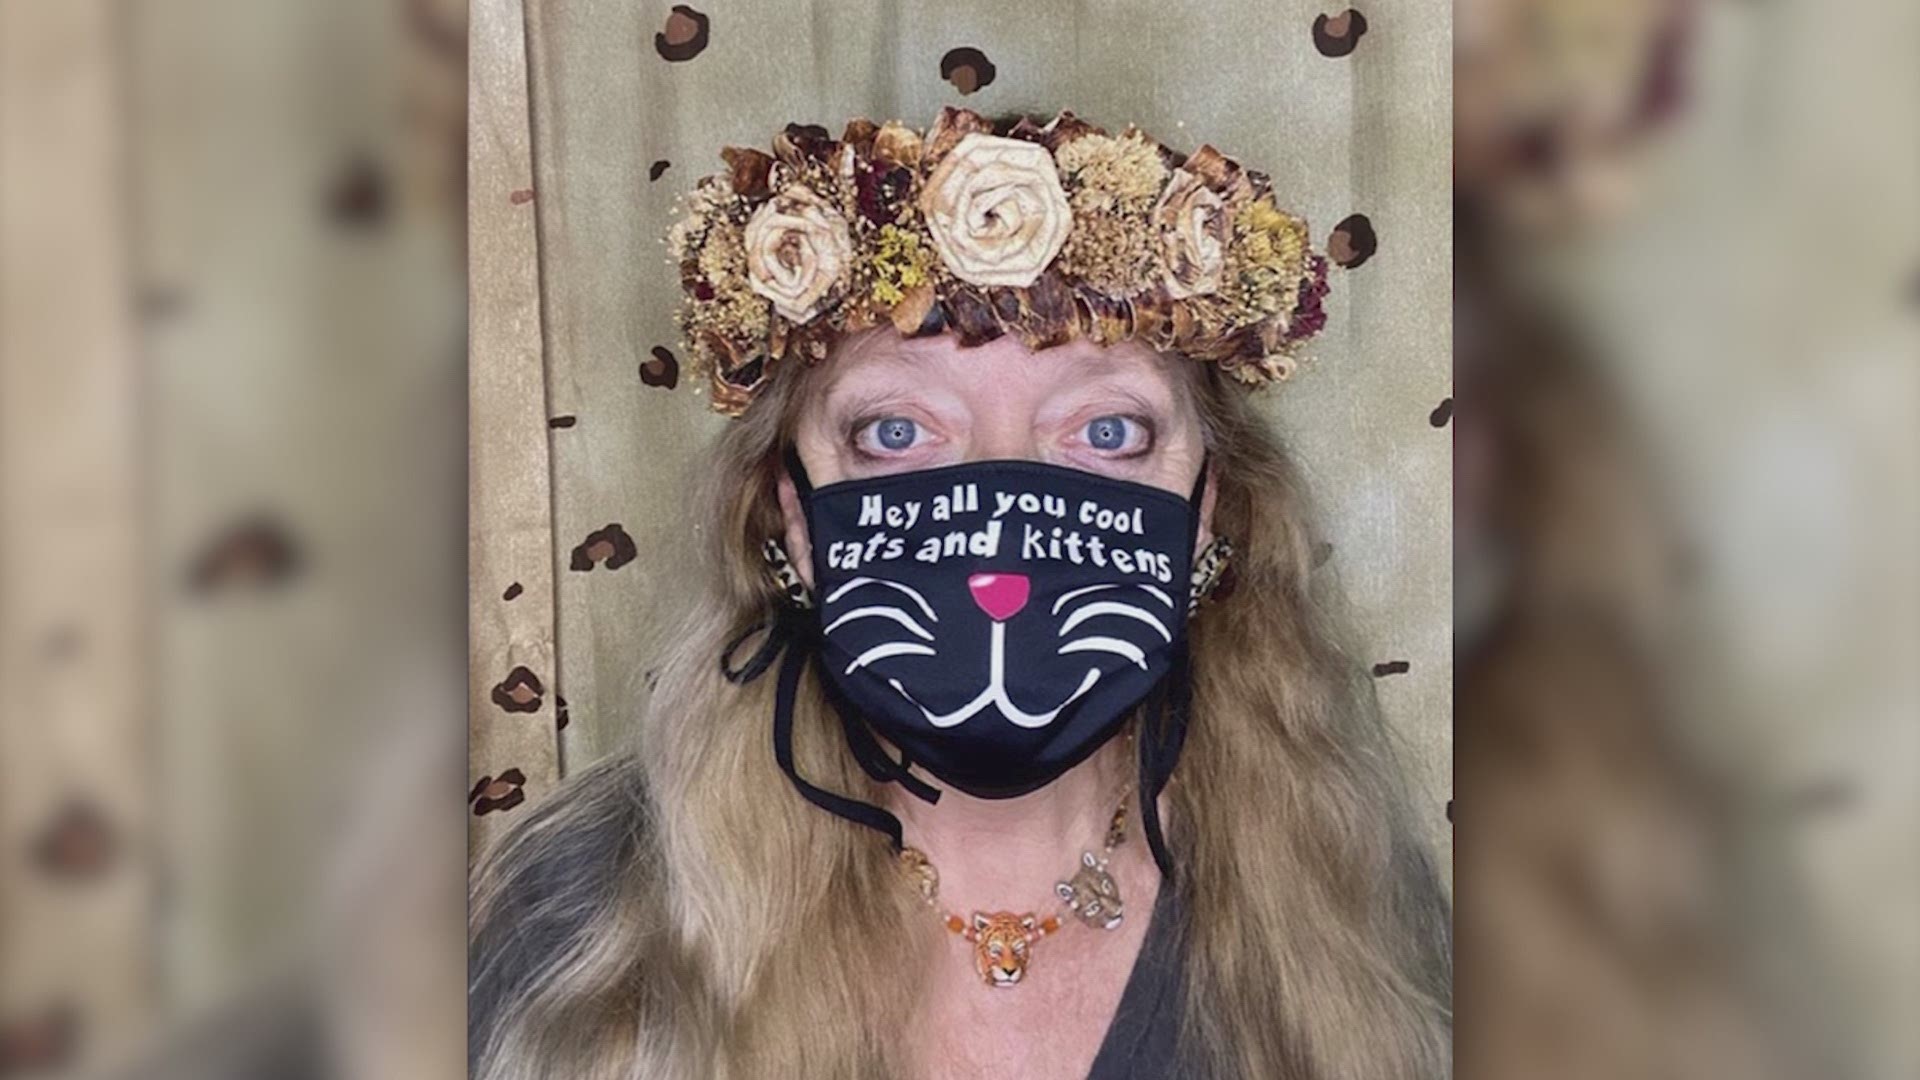 Carole Baskin of 'Tiger King' is selling cat-themed face masks.